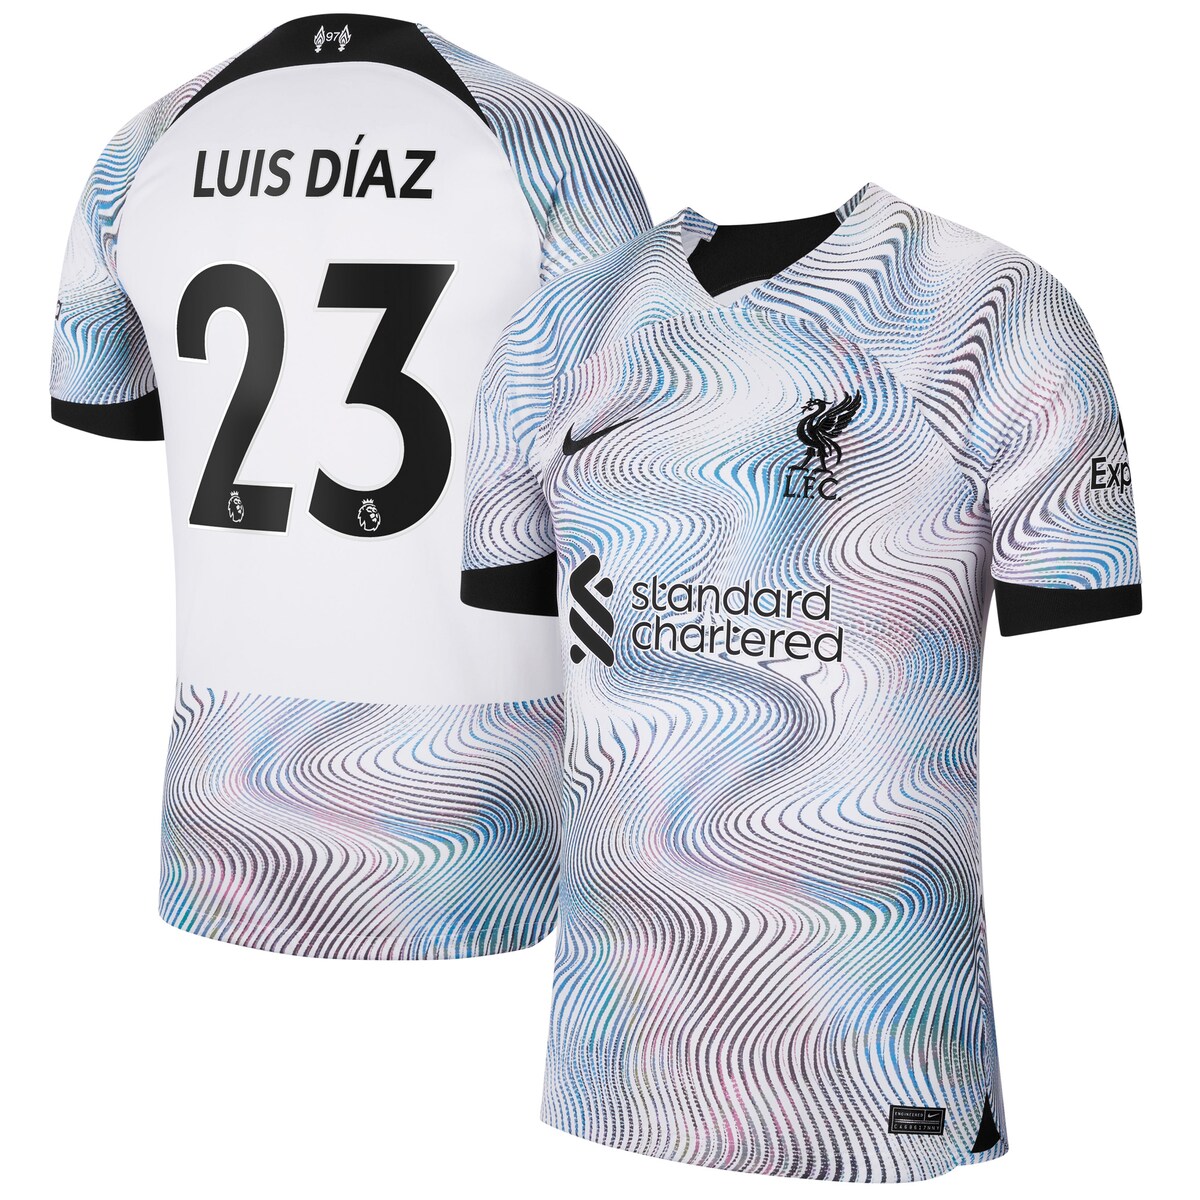 You love watching Liverpool on the pitch, so be sure you're outfitted properly by grabbing this Luis Diaz 2022/23 Home Breathe Stadium Replica Player Jersey. This Nike jersey features heat-sealed team graphics that proudly display your Liverpool fandom. The Dri-FIT technology wicks moisture away to keep you comfortable while cheering for your favorite squad.Officially licensedNike Breathe fabrics move sweat from your skin and feature highly breathable construction to help you stay dry and comfortableDri-FIT technology wicks away moistureSewn on embroidered team crest on left chestImportedMachine wash, tumble dry lowMaterial: 100% PolyesterBrand: NikeTagless collar for added comfortWoven Authentic Nike jock tag on left hemVentilated mesh panel insertsEmbroidered Nike logo on right chestReplica Jersey